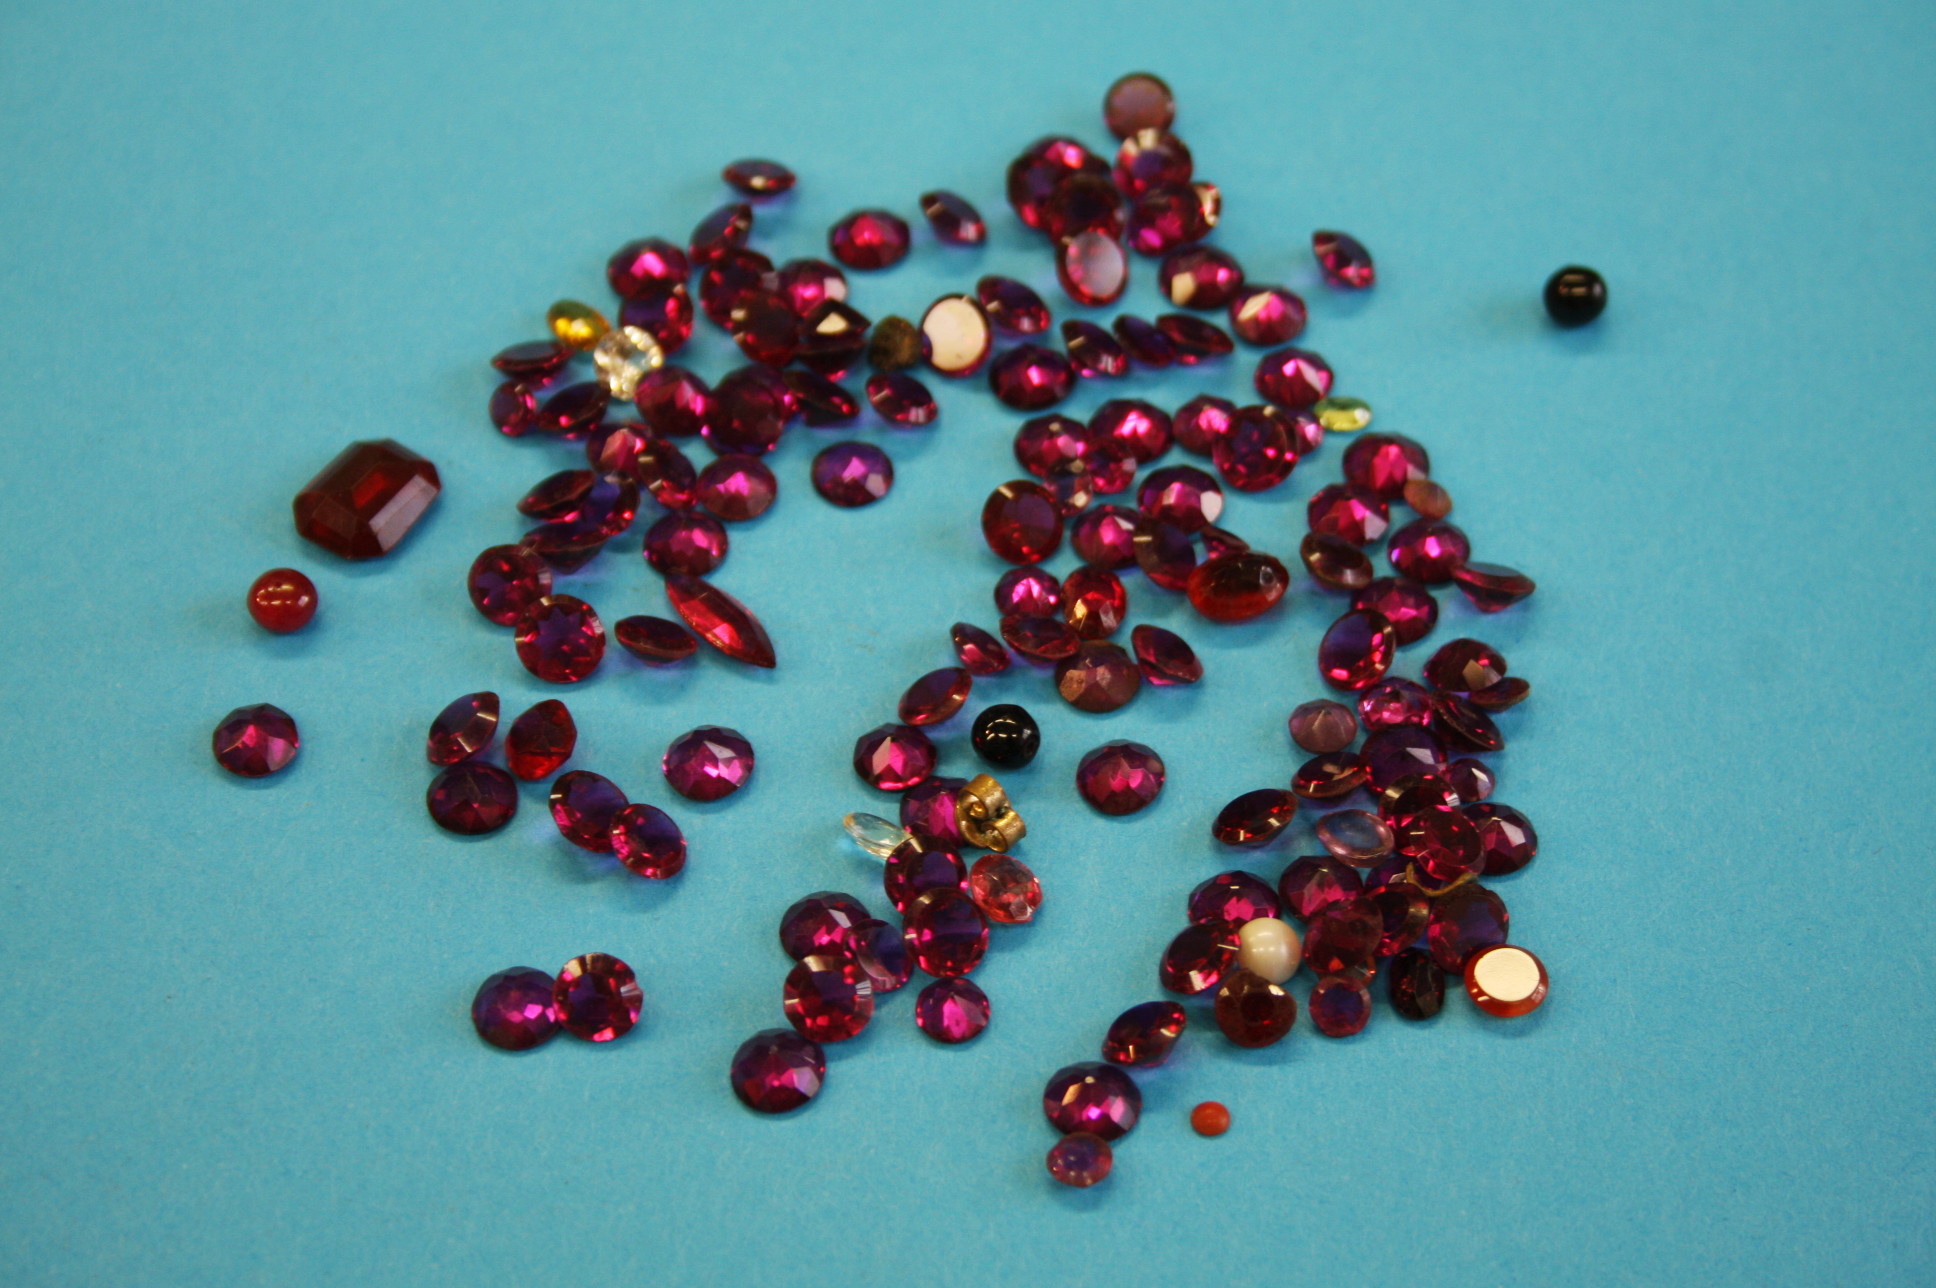 A bag of various garnets and other stones.